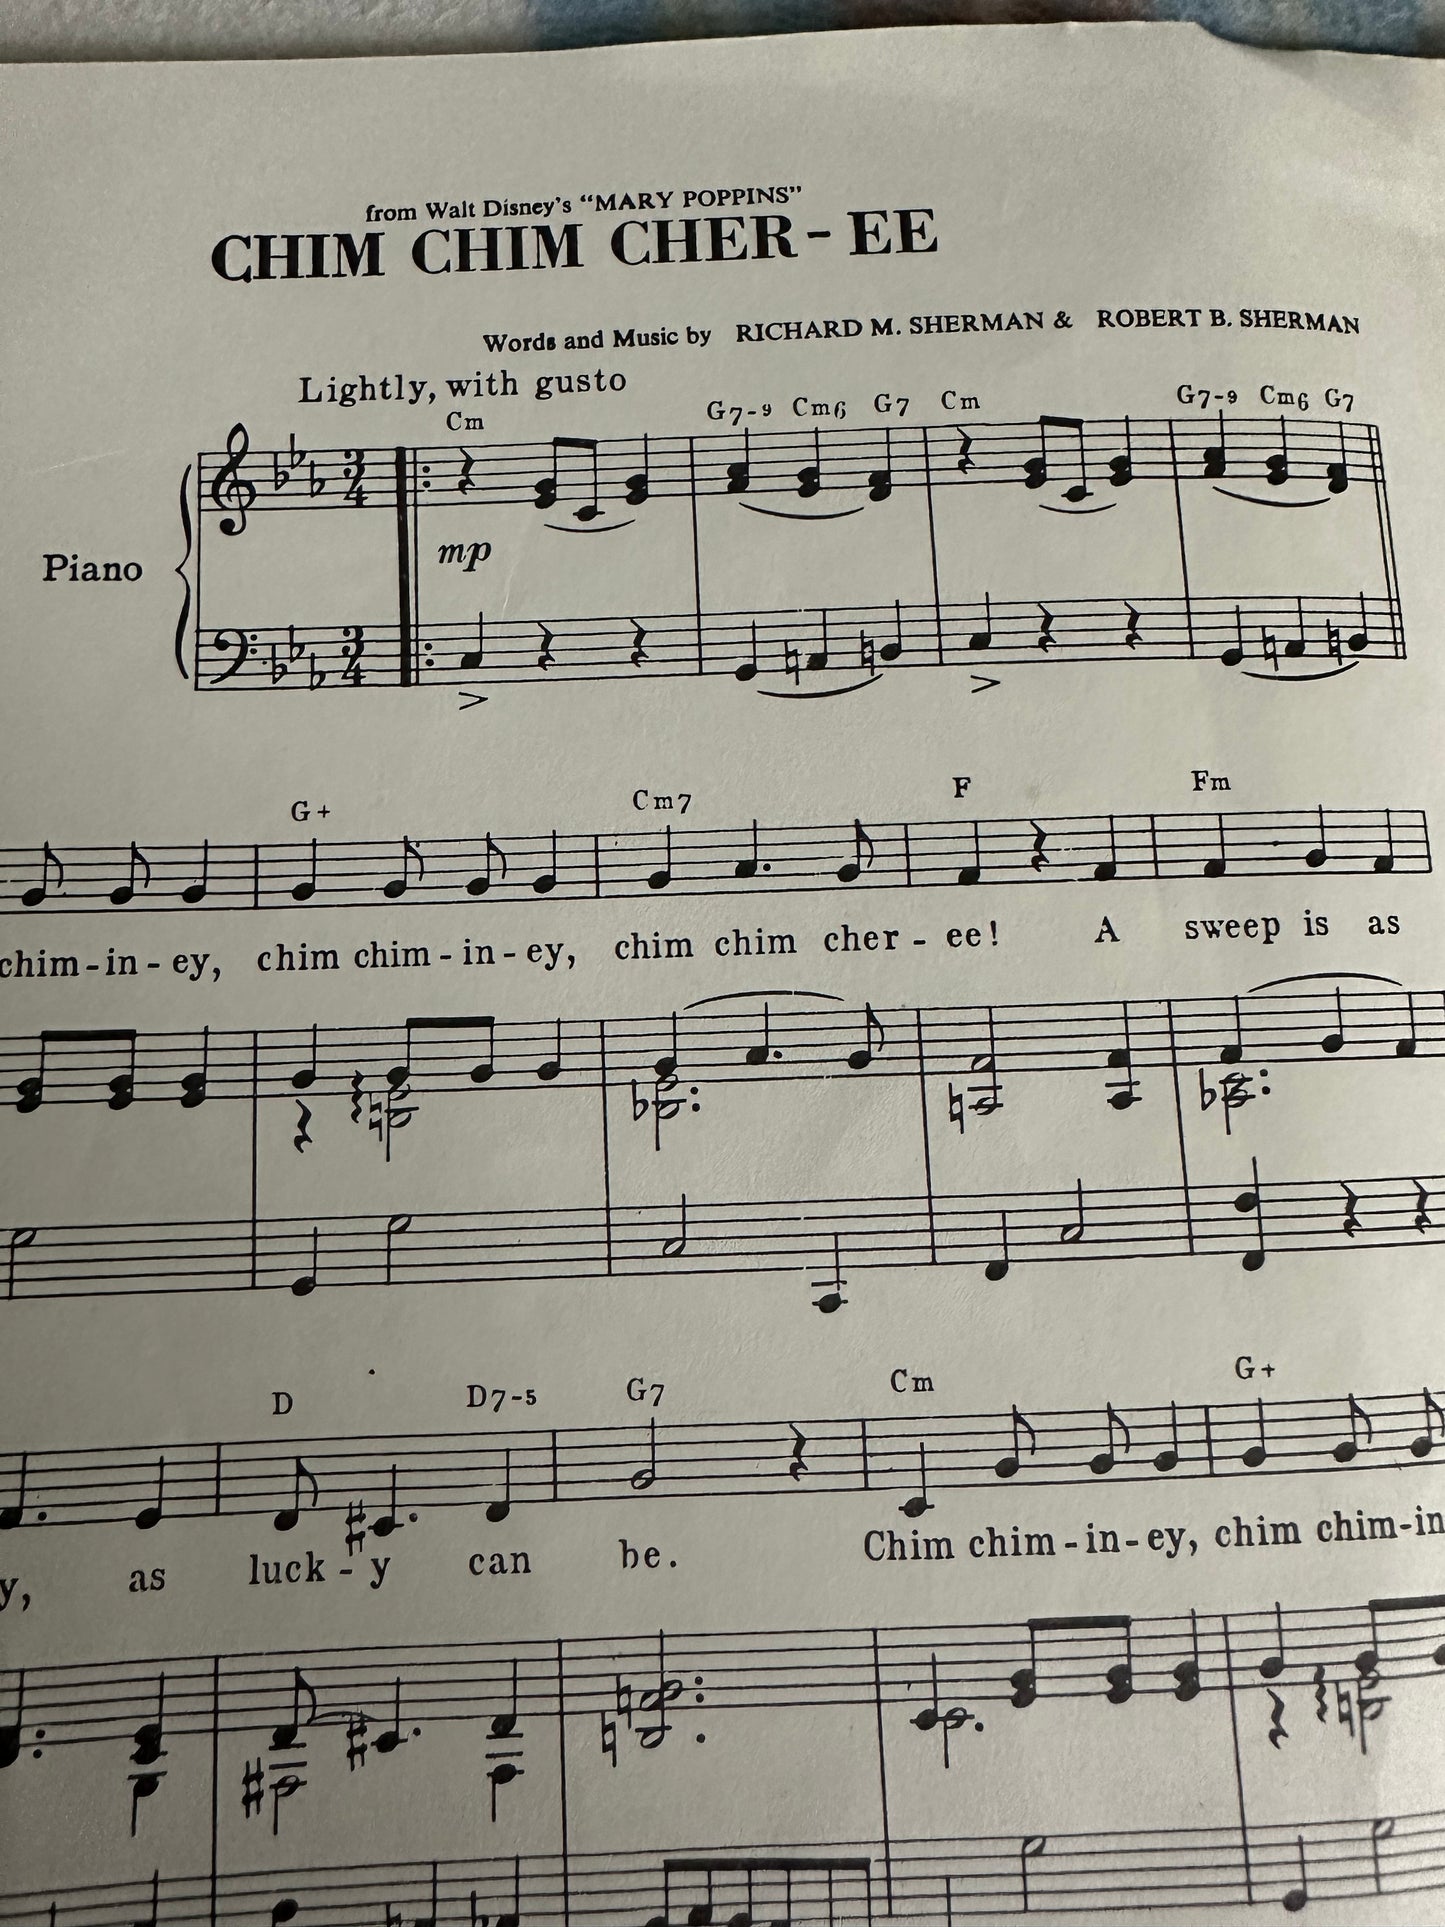 1963 Chim Chim Cher-ee music sheet from Mary Poppins